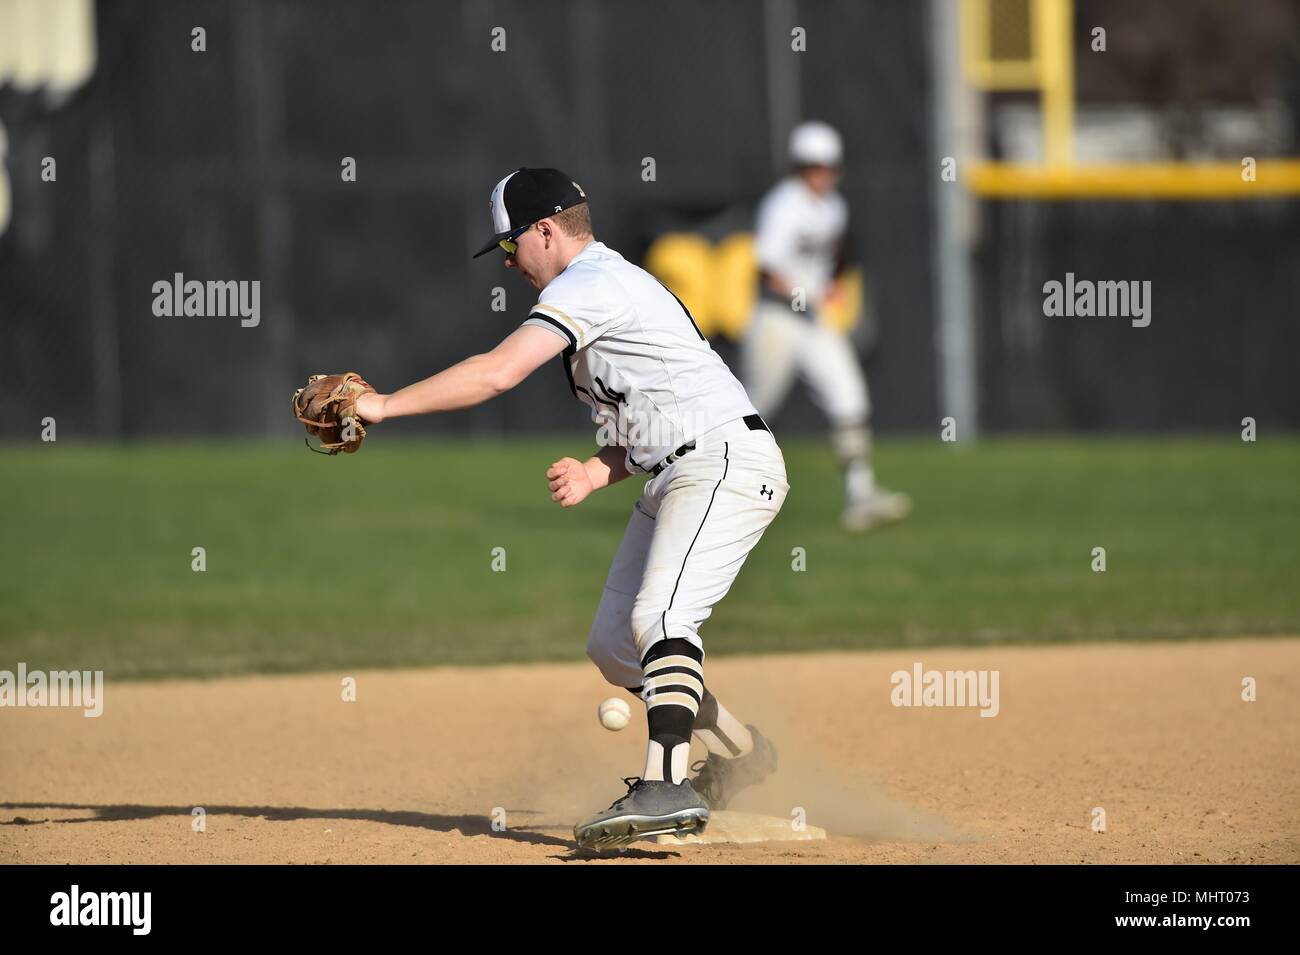 Second baseman drops a throw from the shortstop negating a force out at second.. USA. Stock Photo